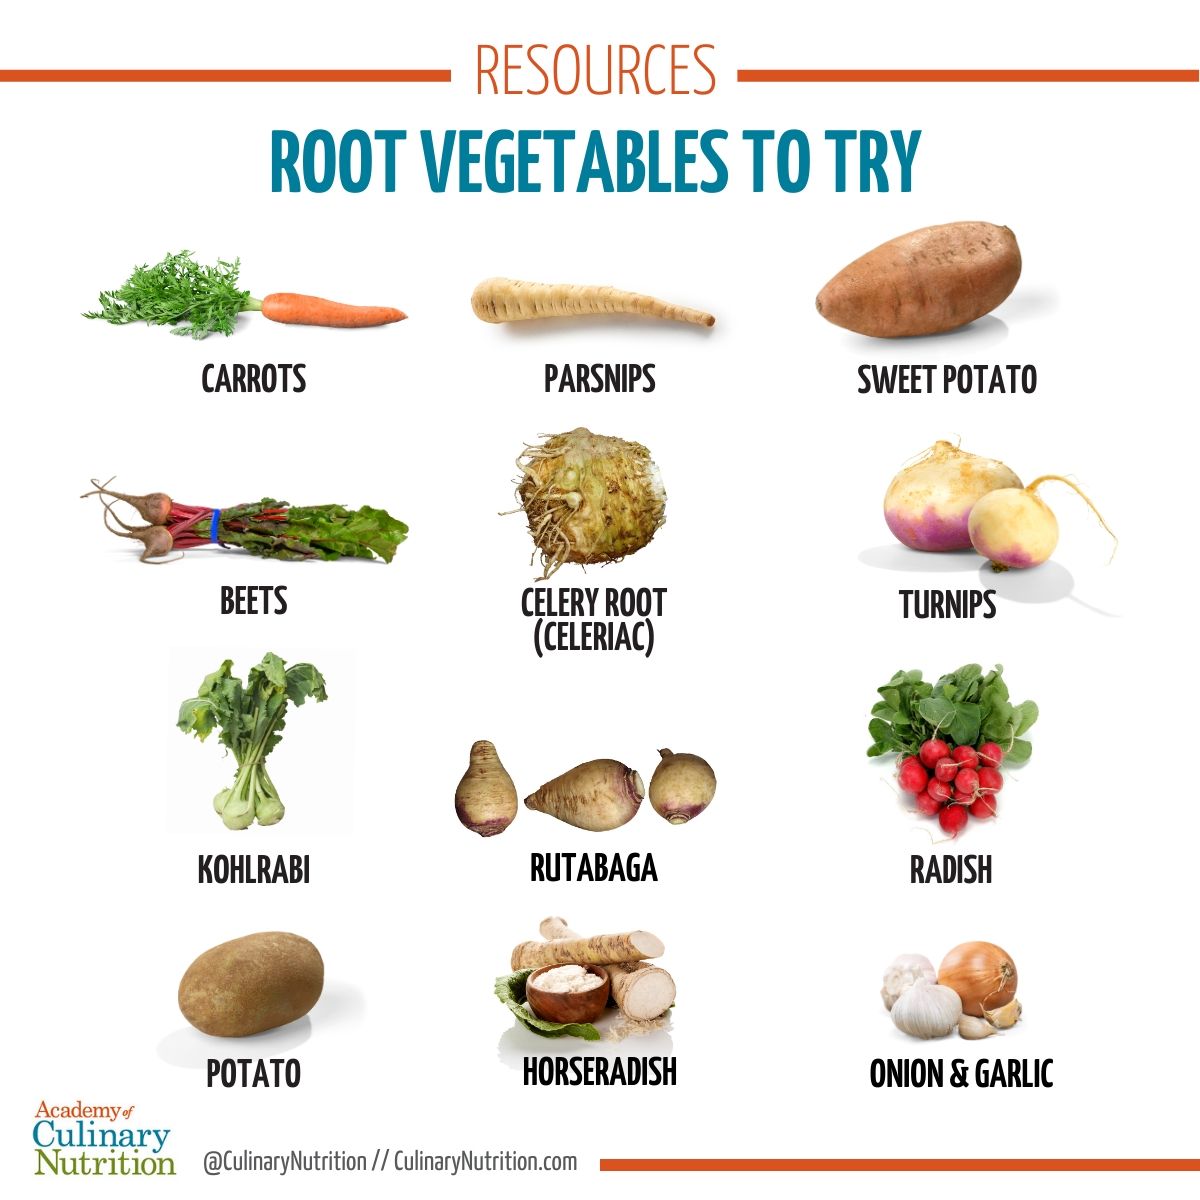 Guide to Root Vegetables